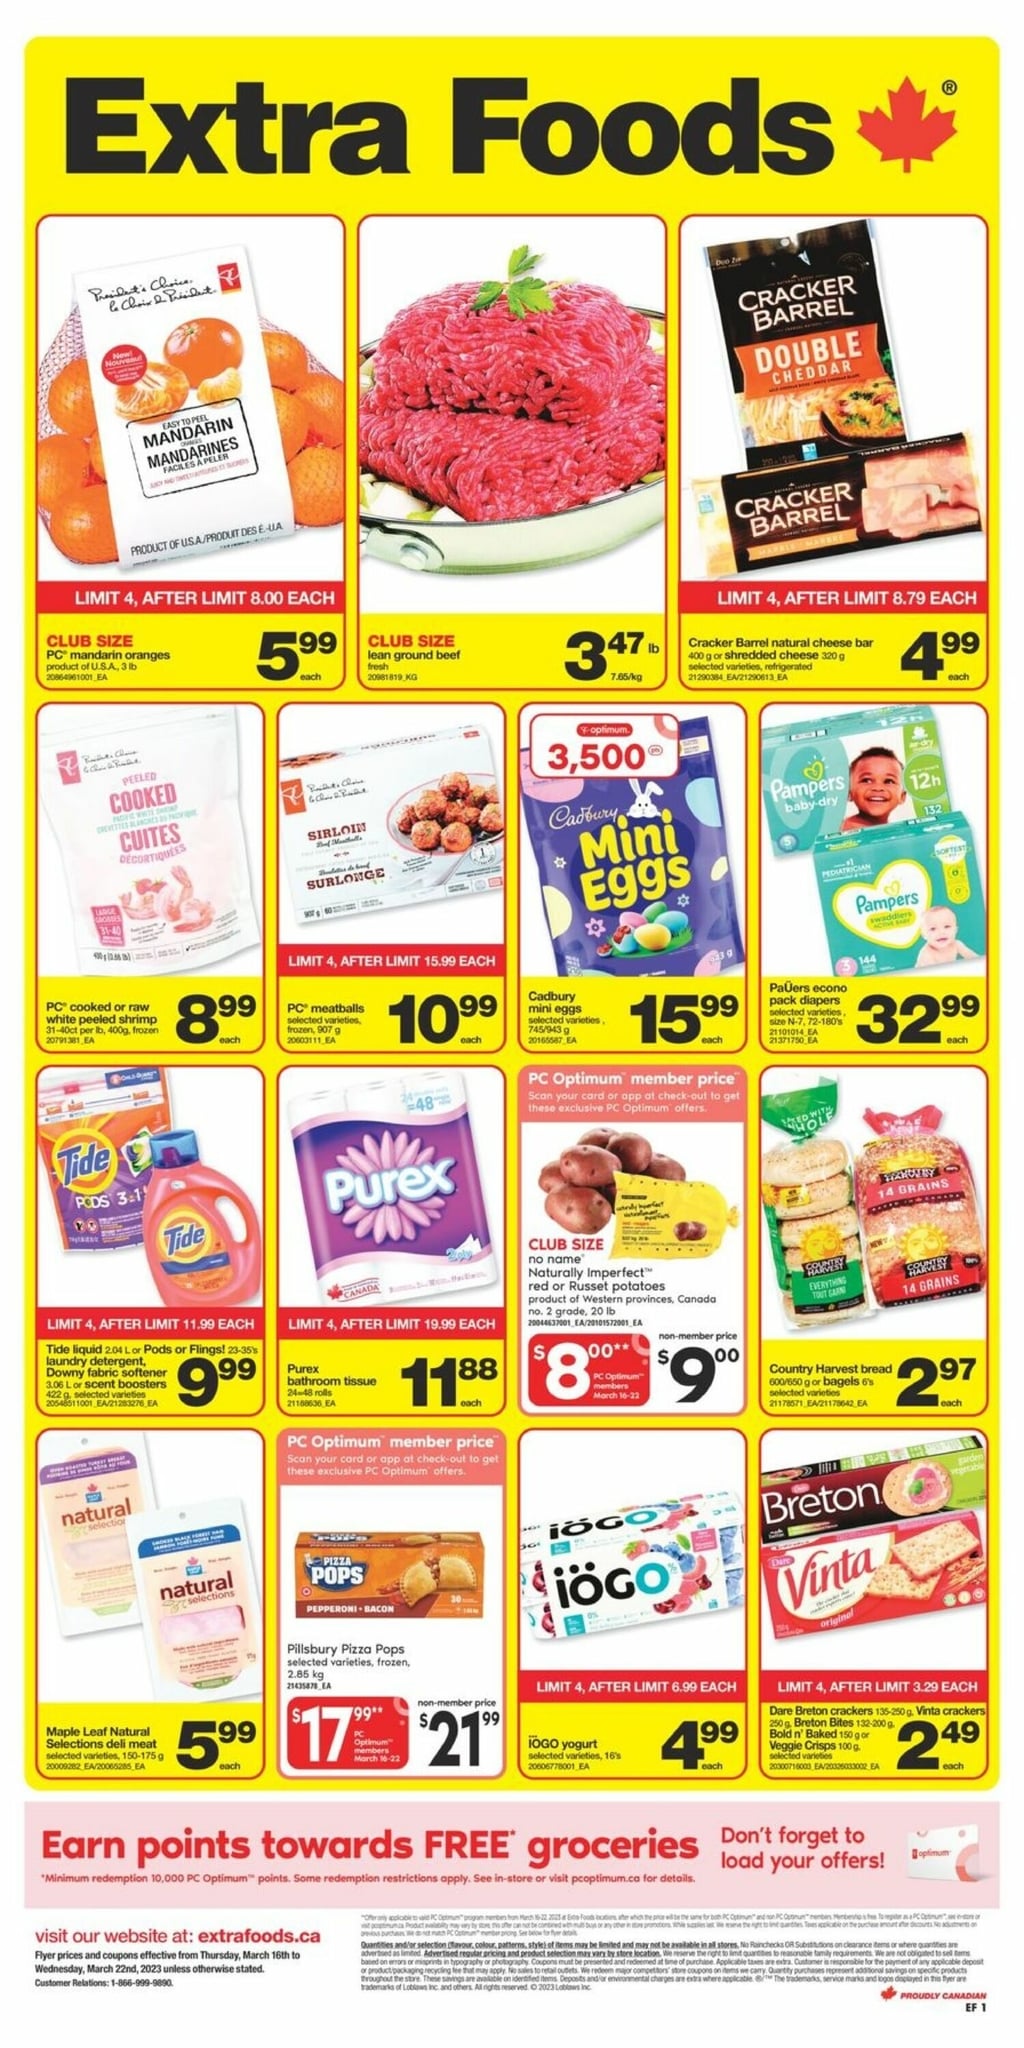 Extra Foods - Weekly Flyer Specials - Page 1